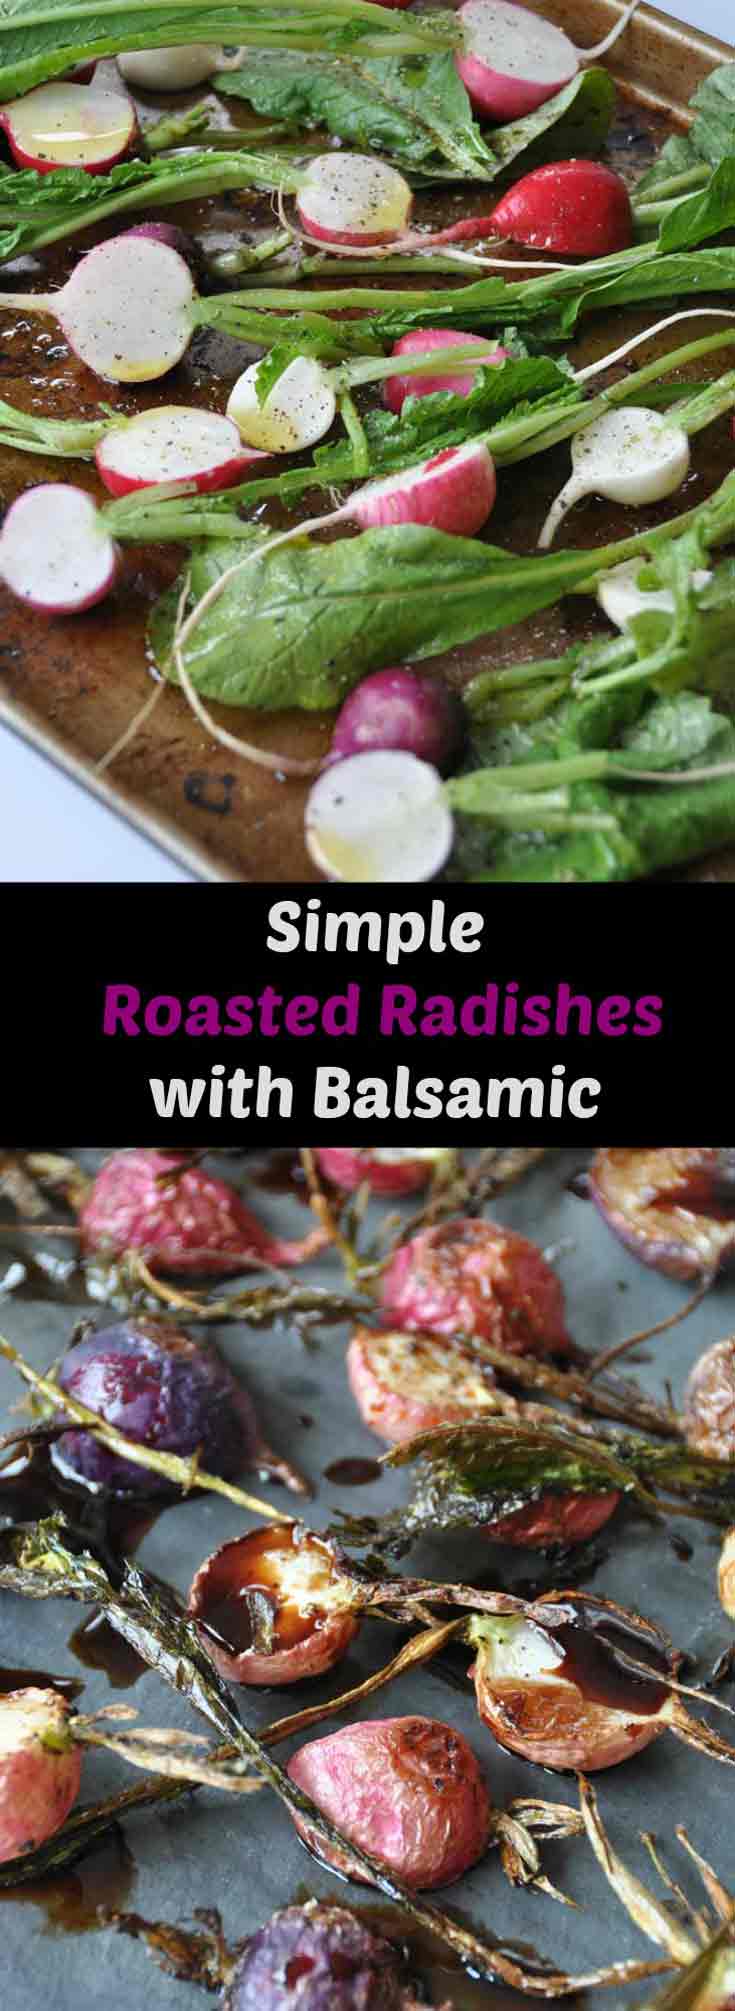 Simple and easy to make roasted radishes with balsamic vinegar. Perfect for an appetizer, side dish, and for Easter.